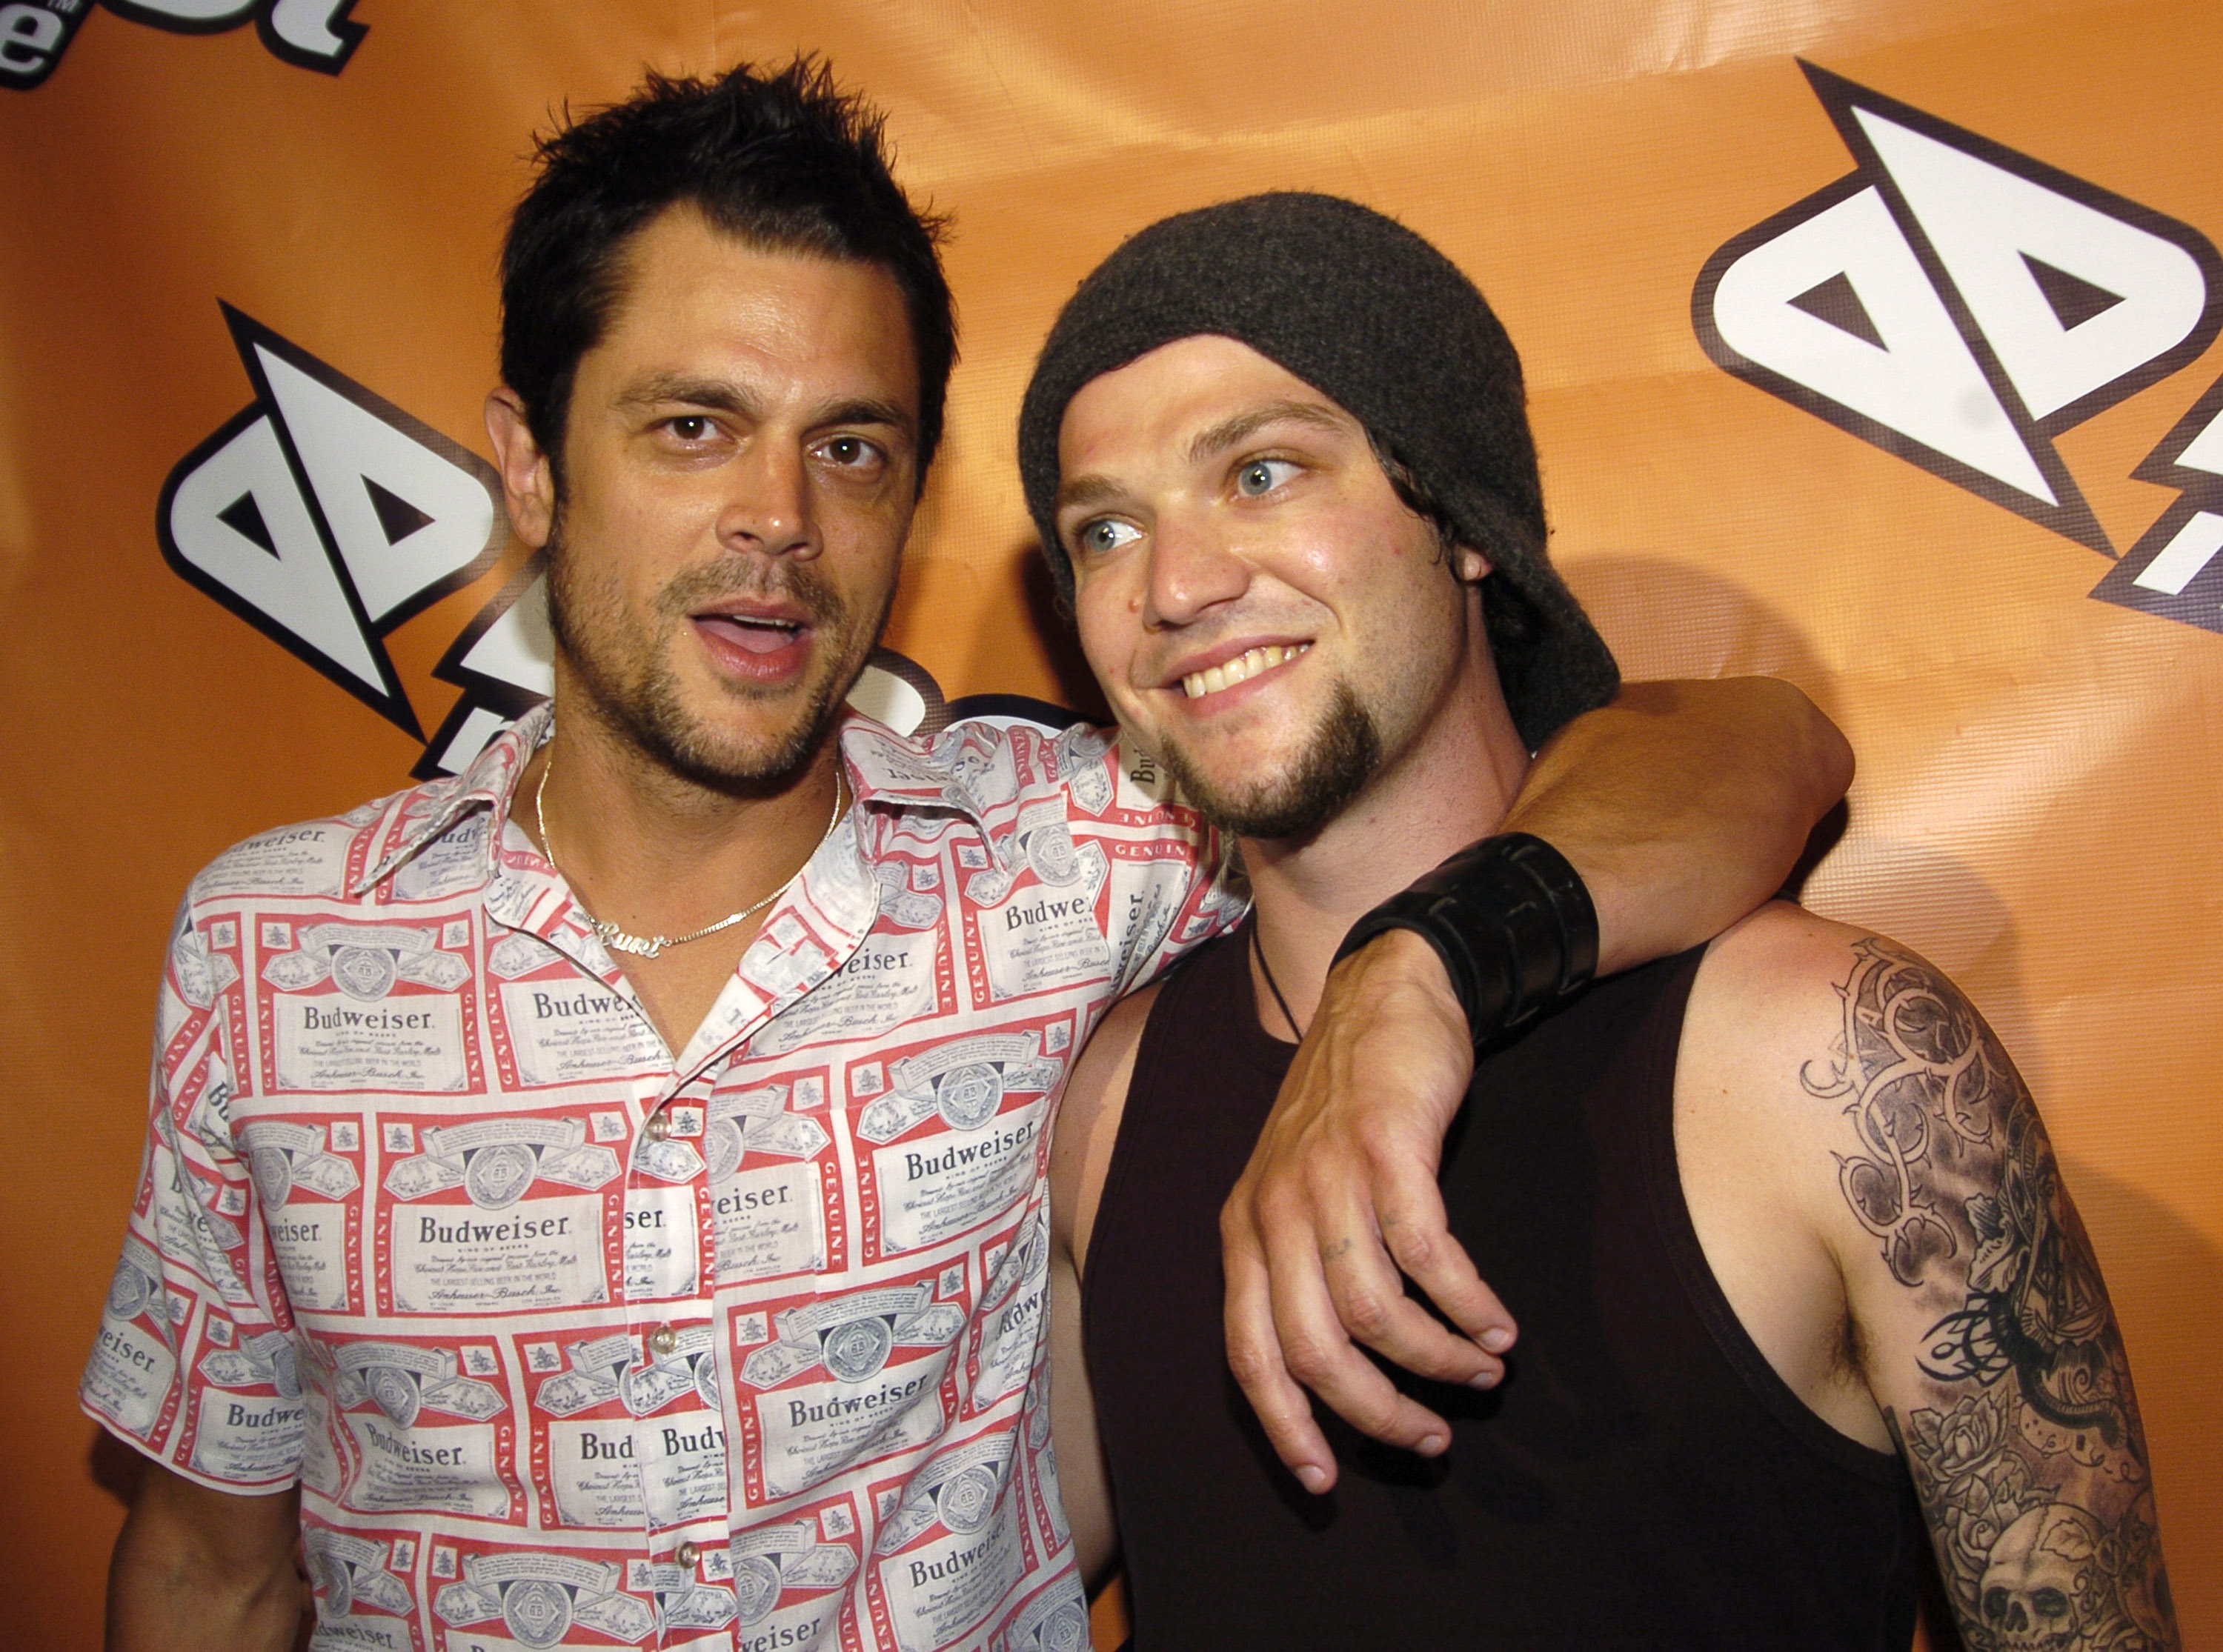 Bam Margera Got a Dr Phil Neck Tattoo Before Getting Arrested